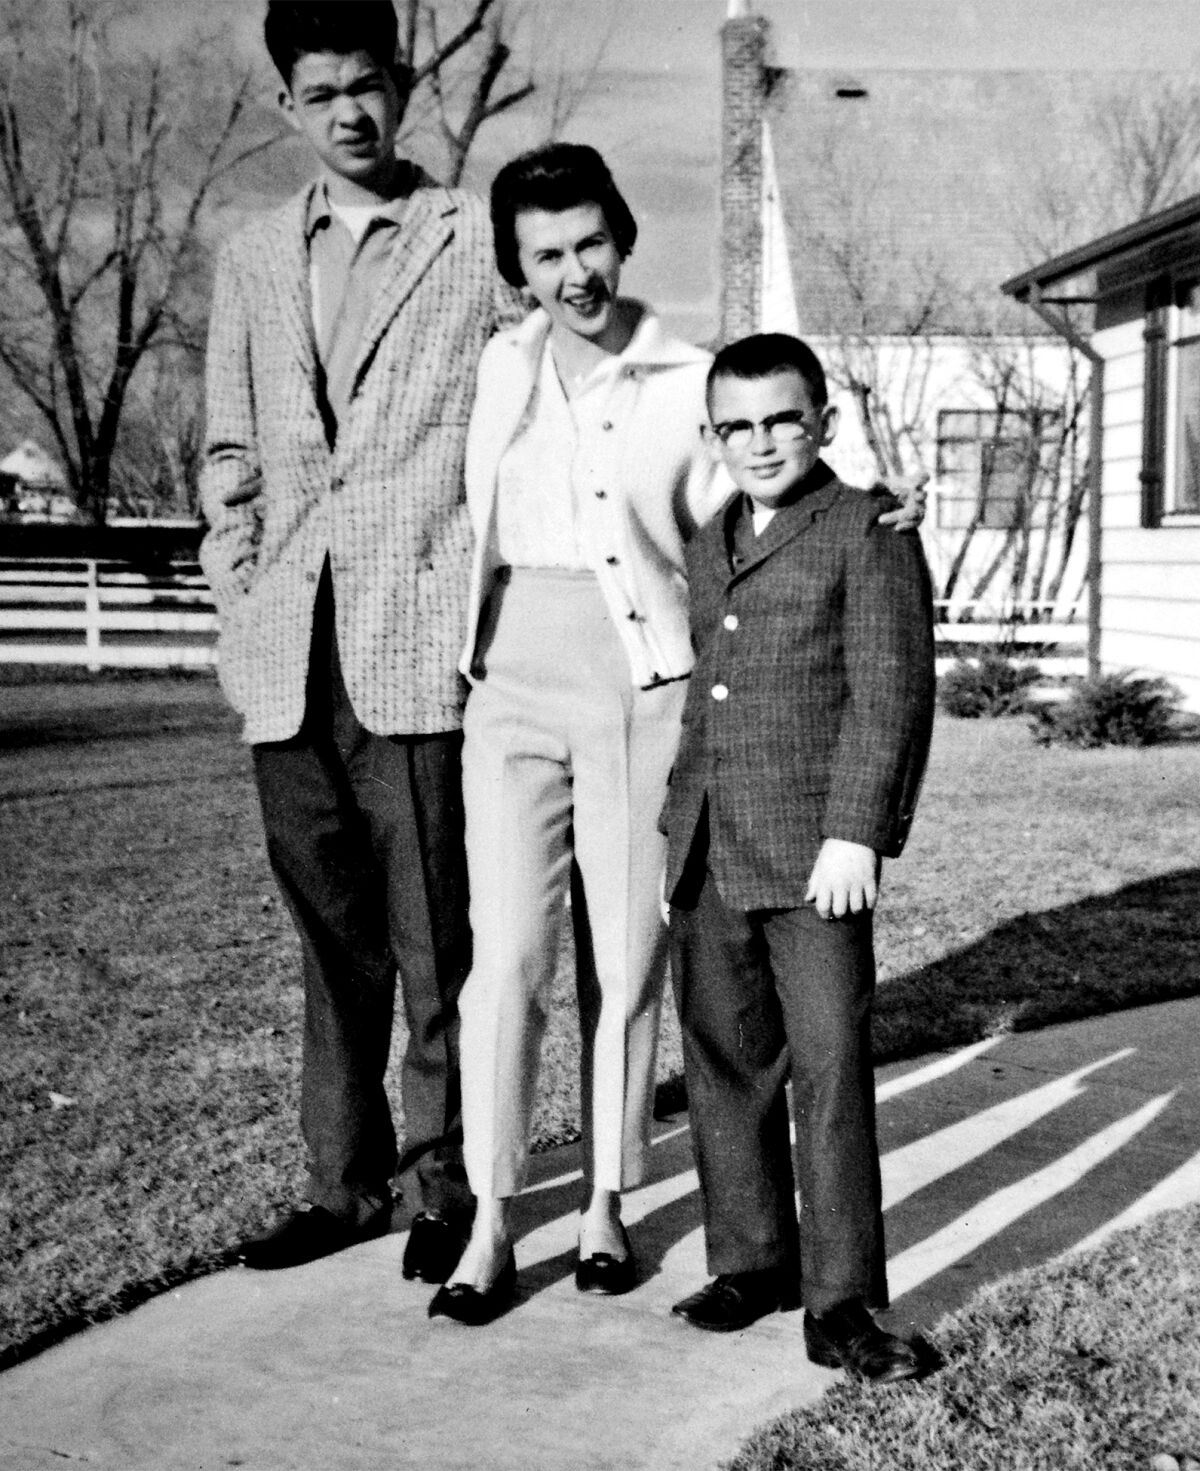 The Trimble boys posed outside with their mother 